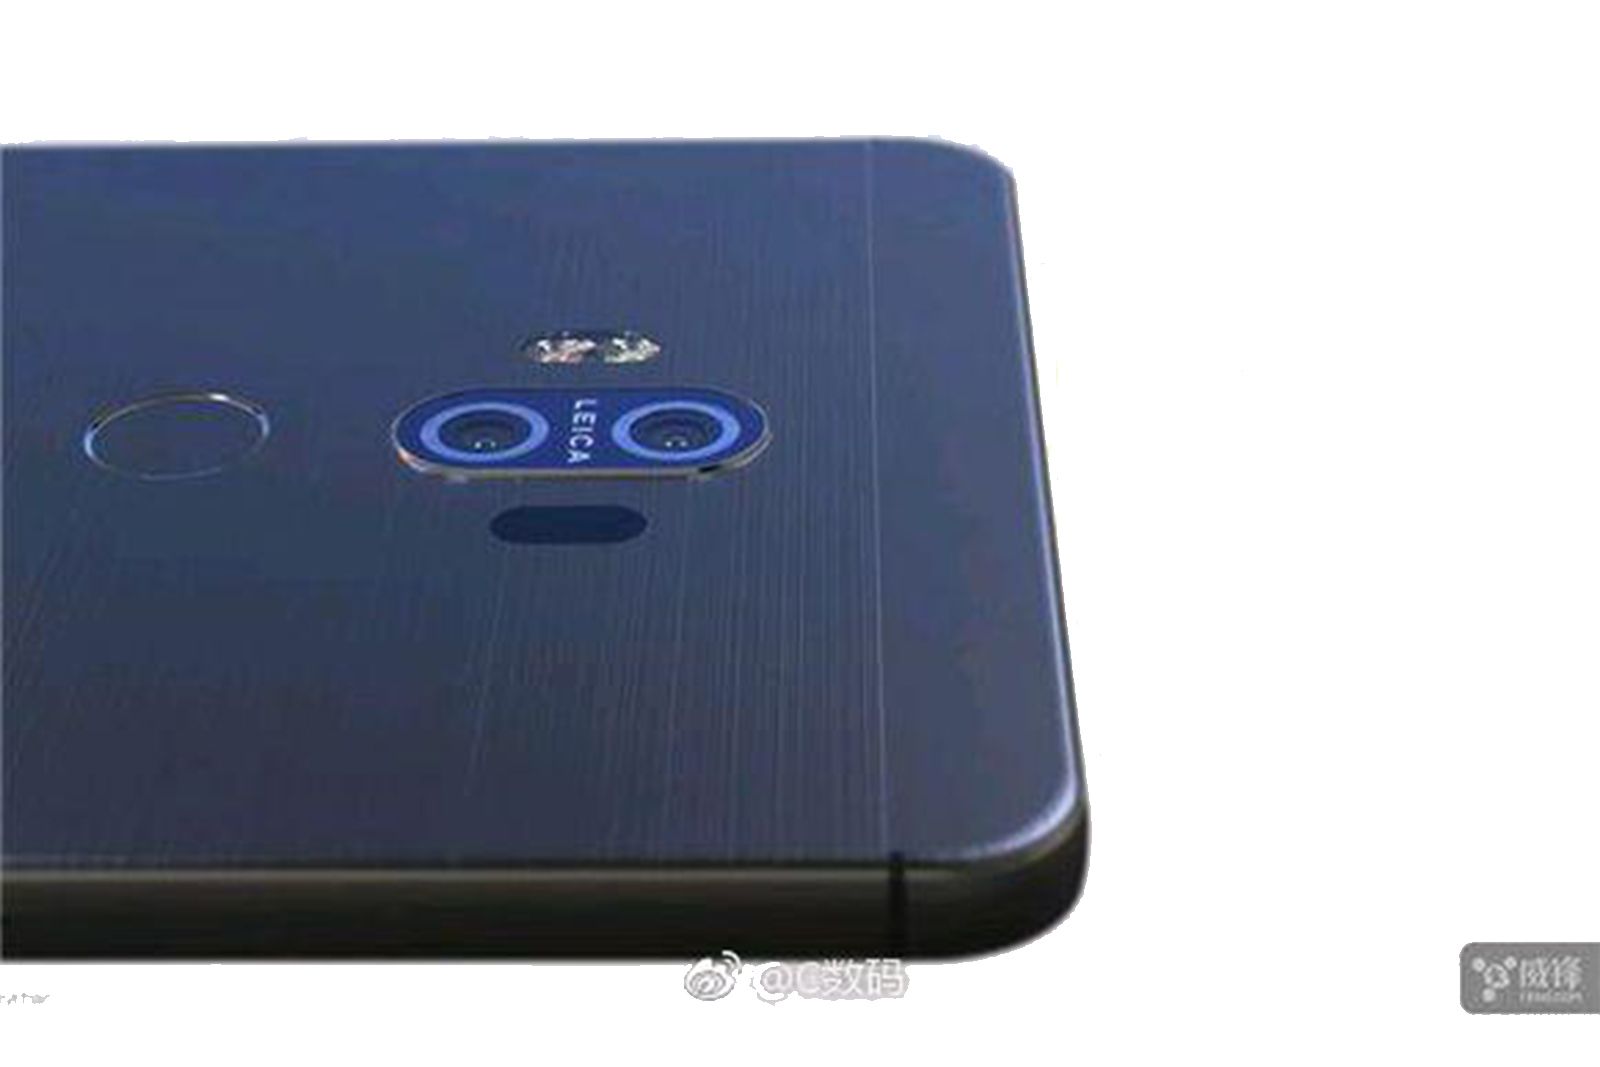 Huawei Mate 10 looks stunning in this leaked render image 3